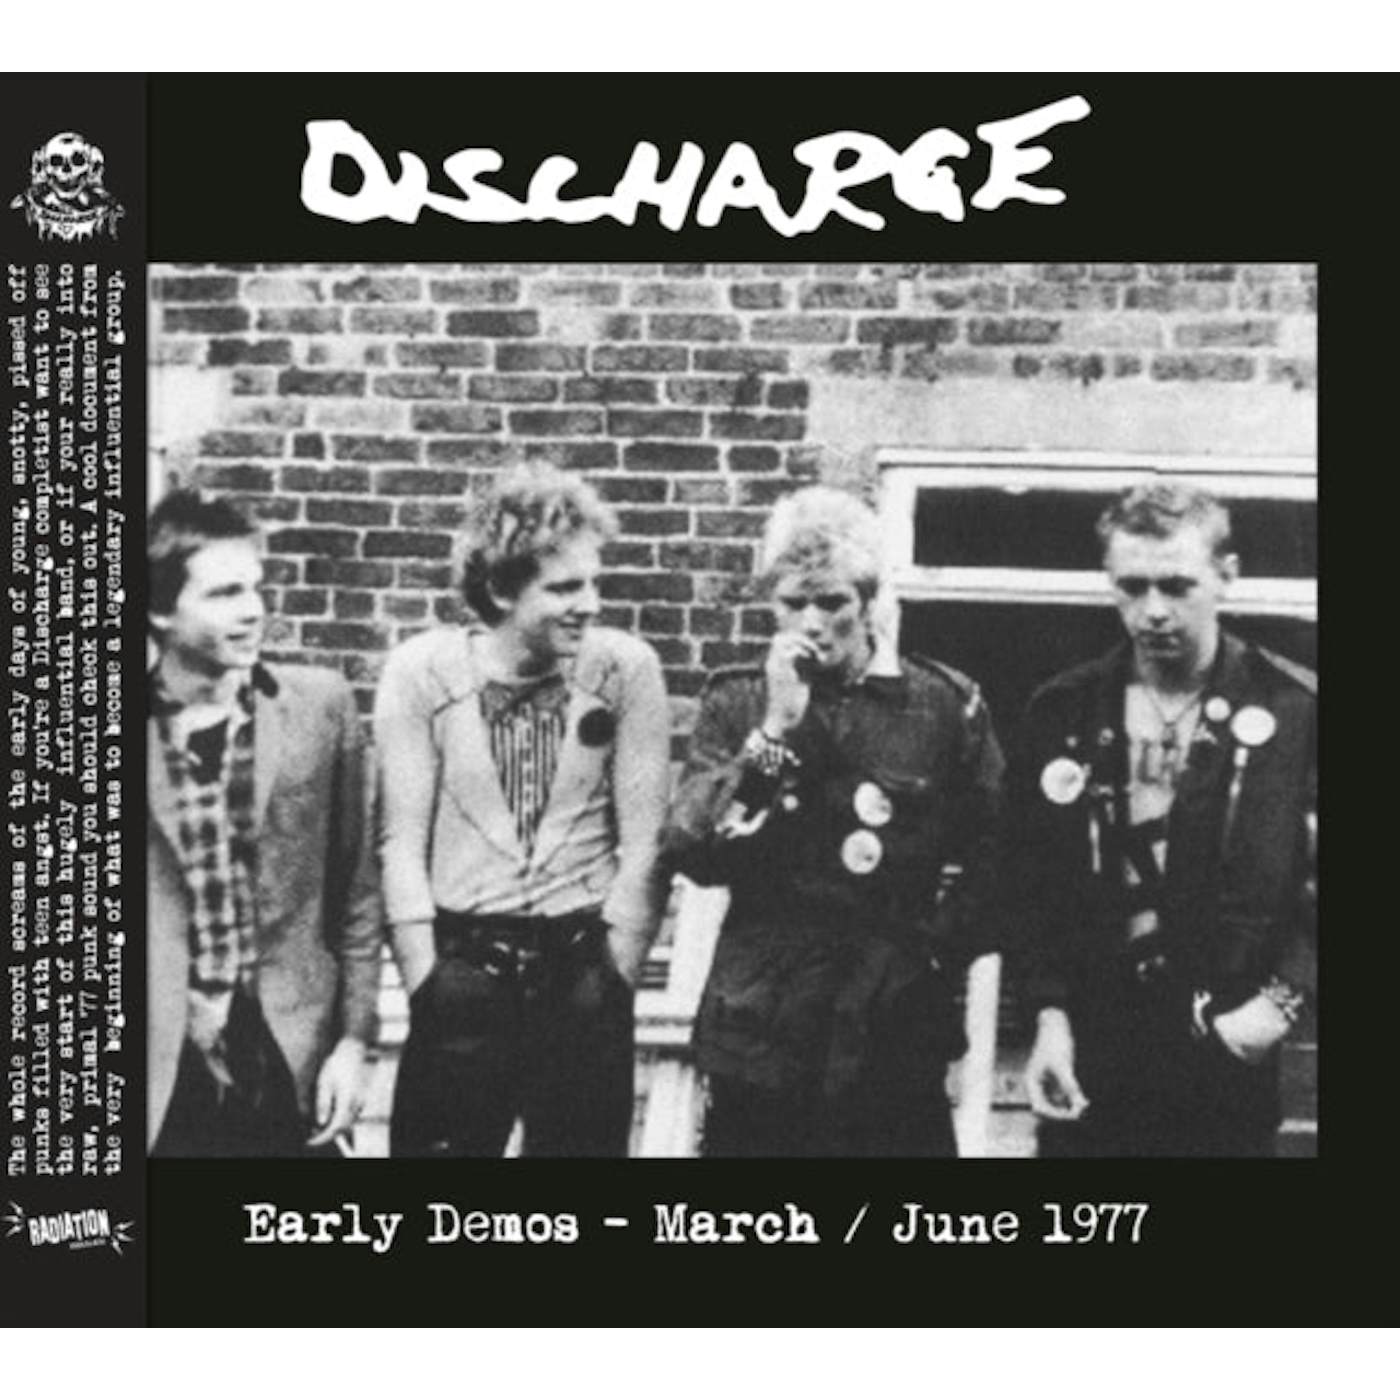 Discharge CD - Early Demos - March / June 19 77